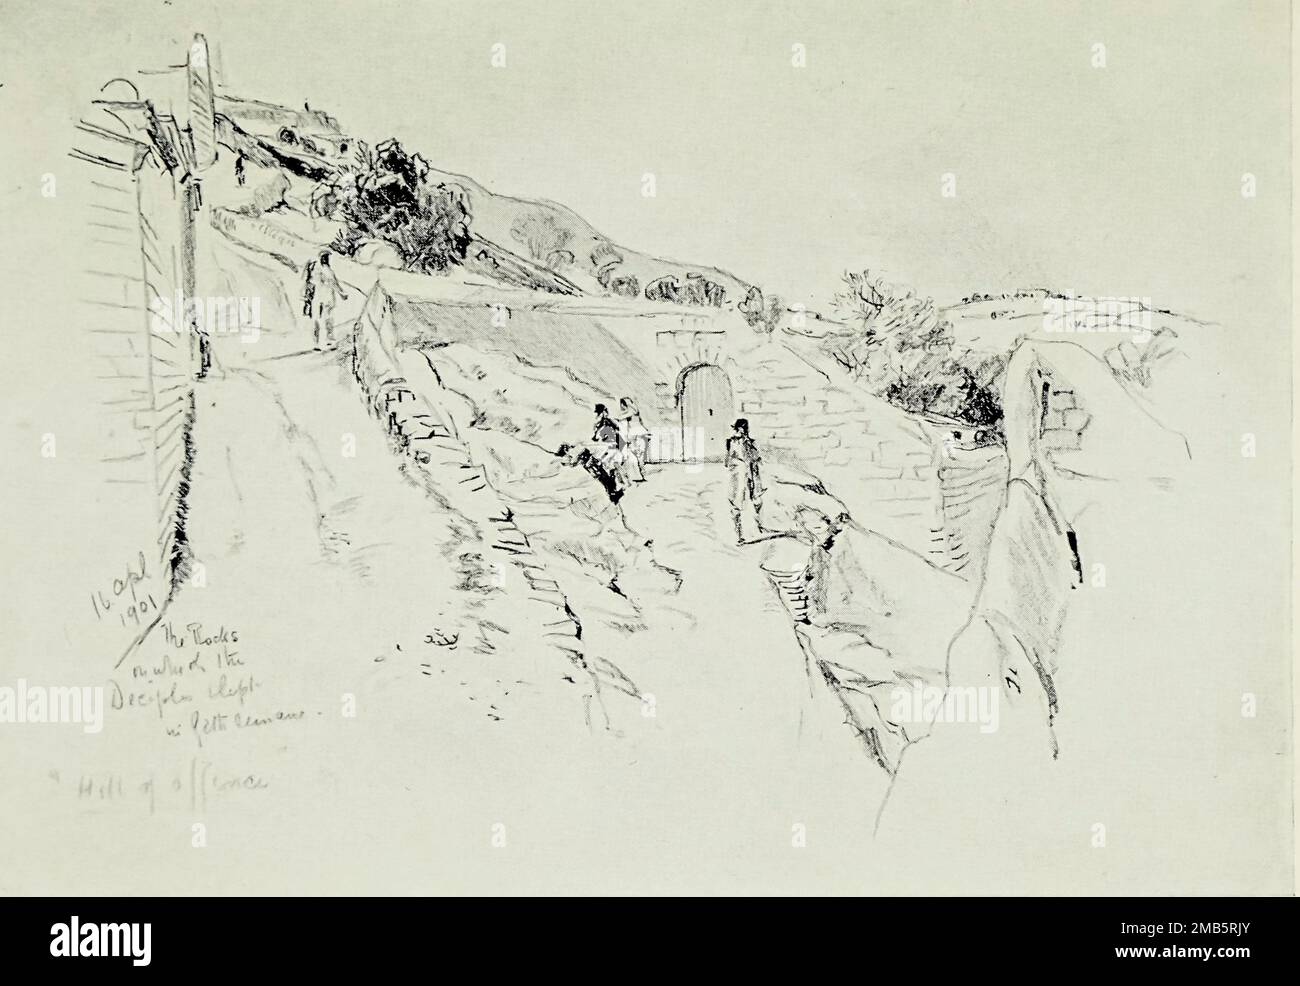 On the Mount of Olives, where the Disciples slept during the Agony in the Garden Sketched by John Fulleylove from the book ' The Holy land ' Described by John Kelman 1864-1929 Publication date 1902 Publisher London : A. & C. Black Stock Photo